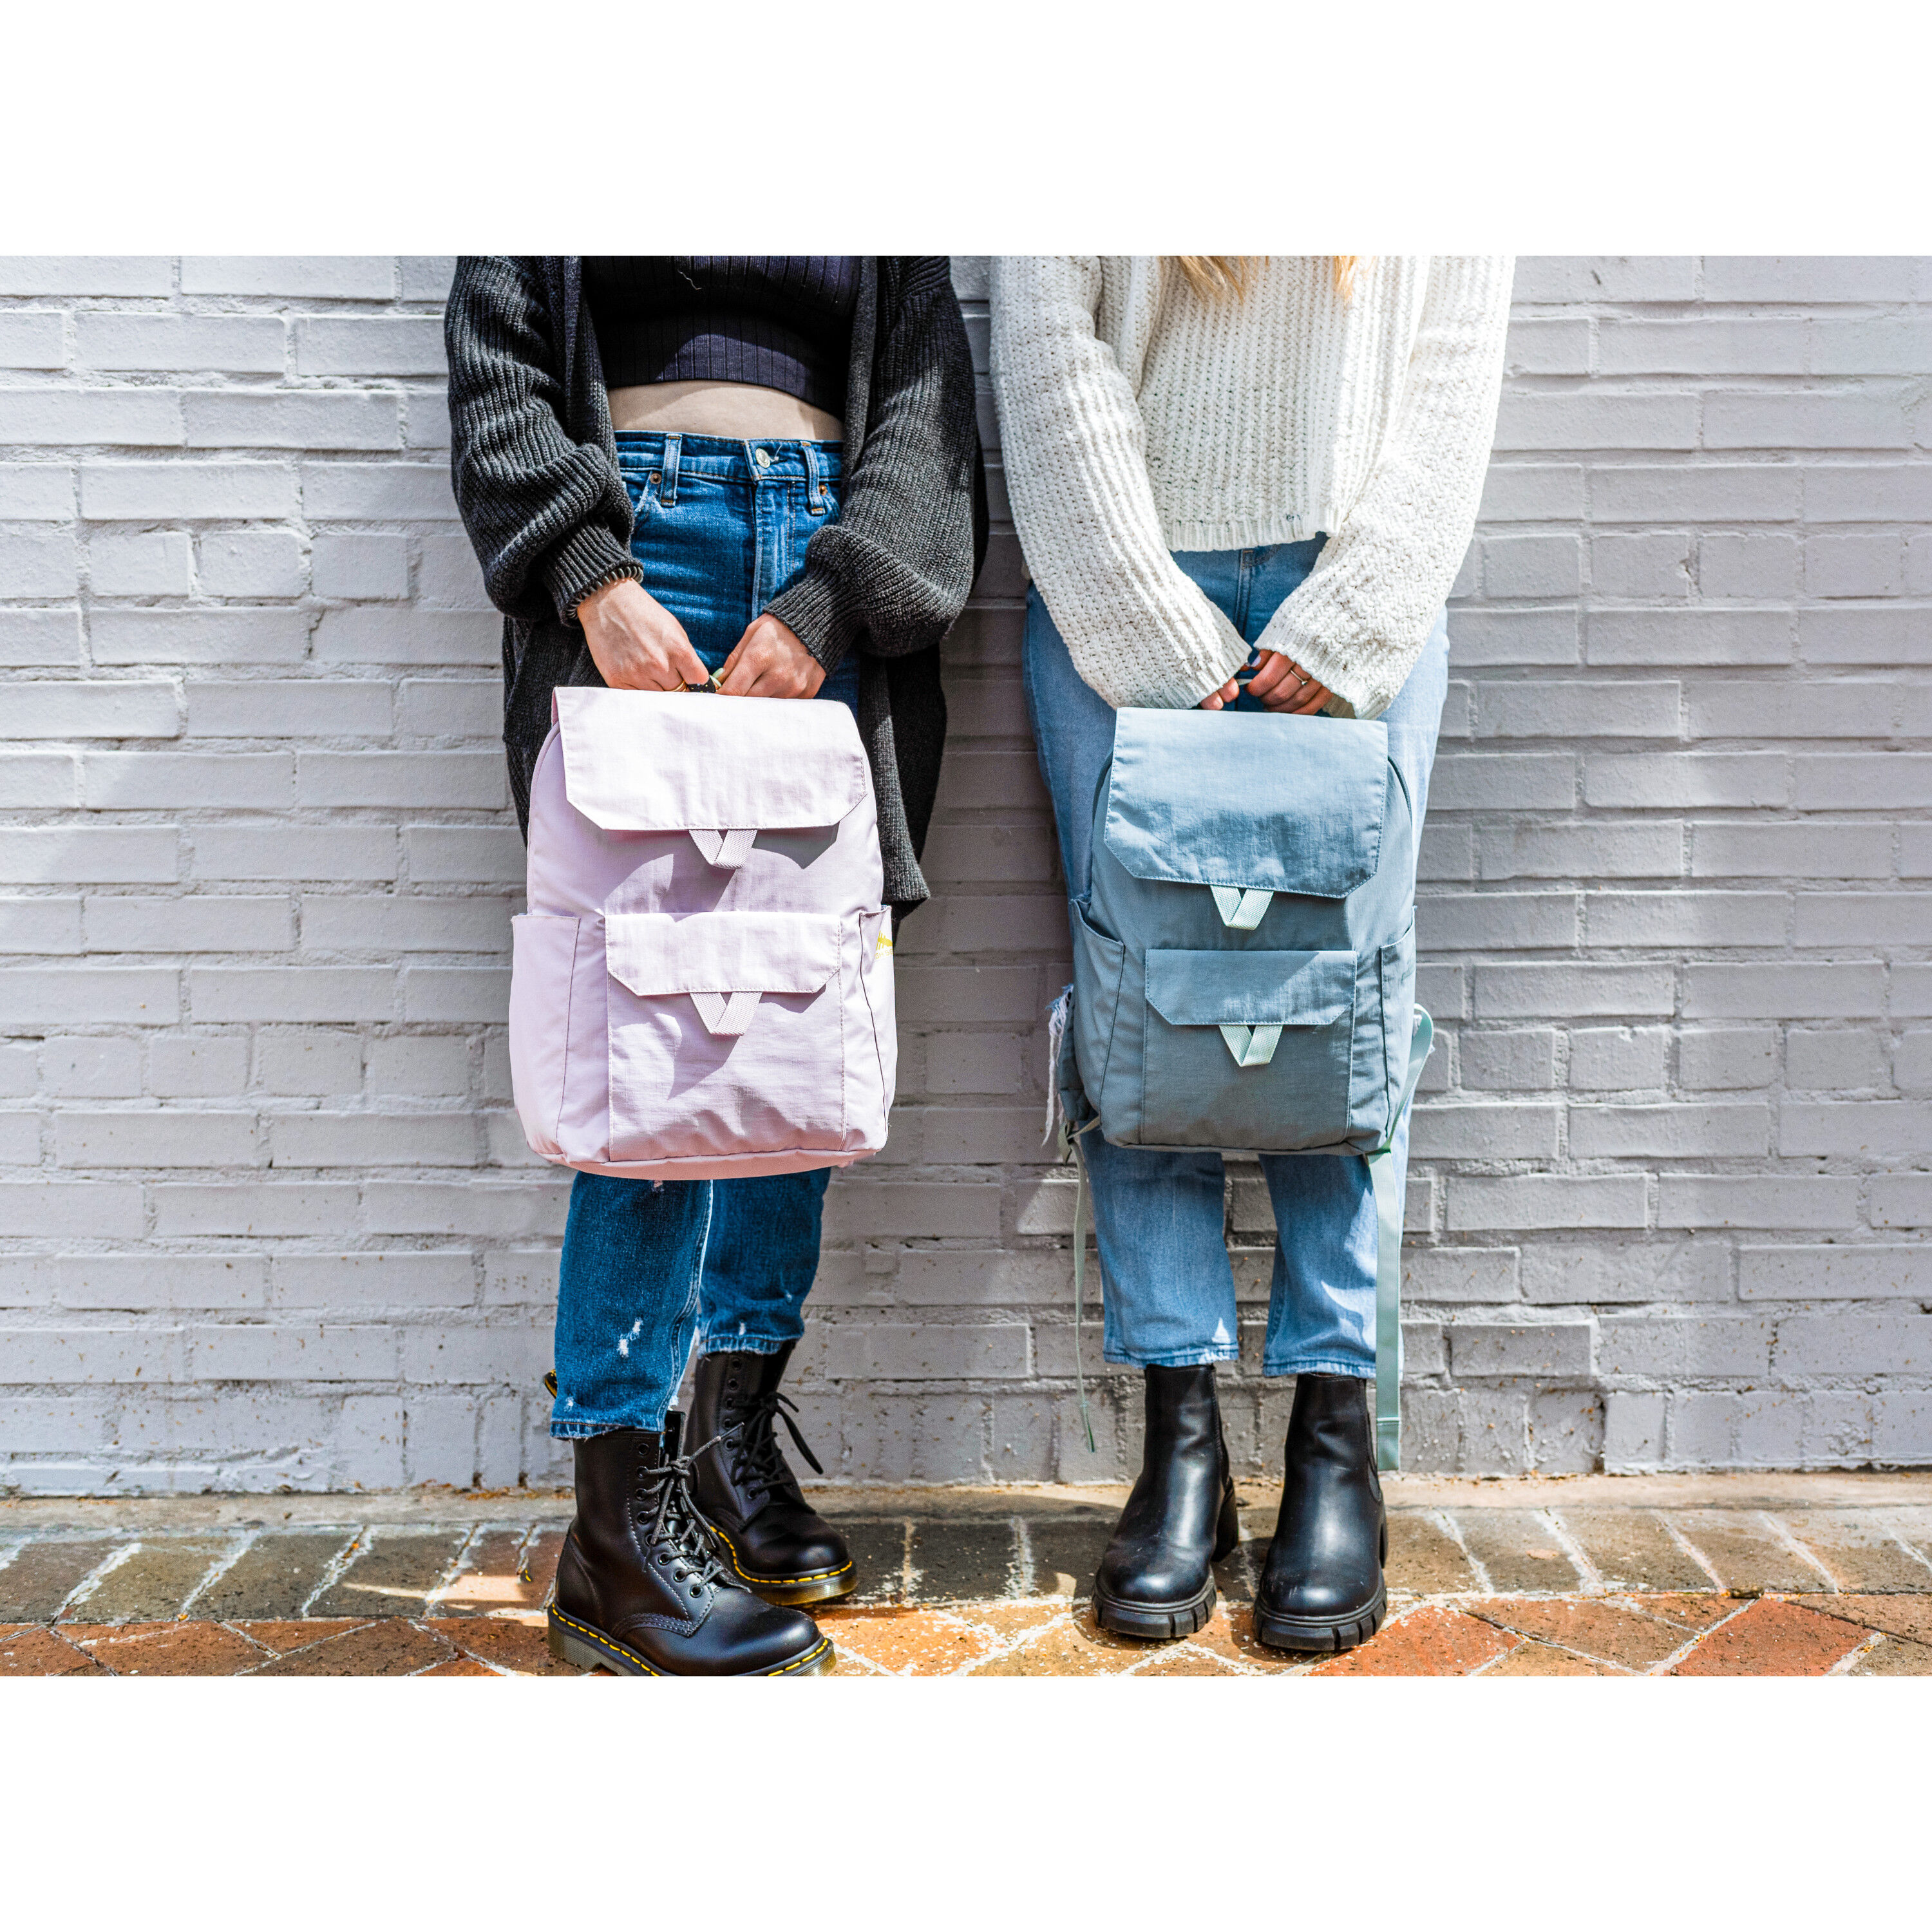 UO Denim Flap Pocket Backpack | Urban Outfitters Australia Official Site